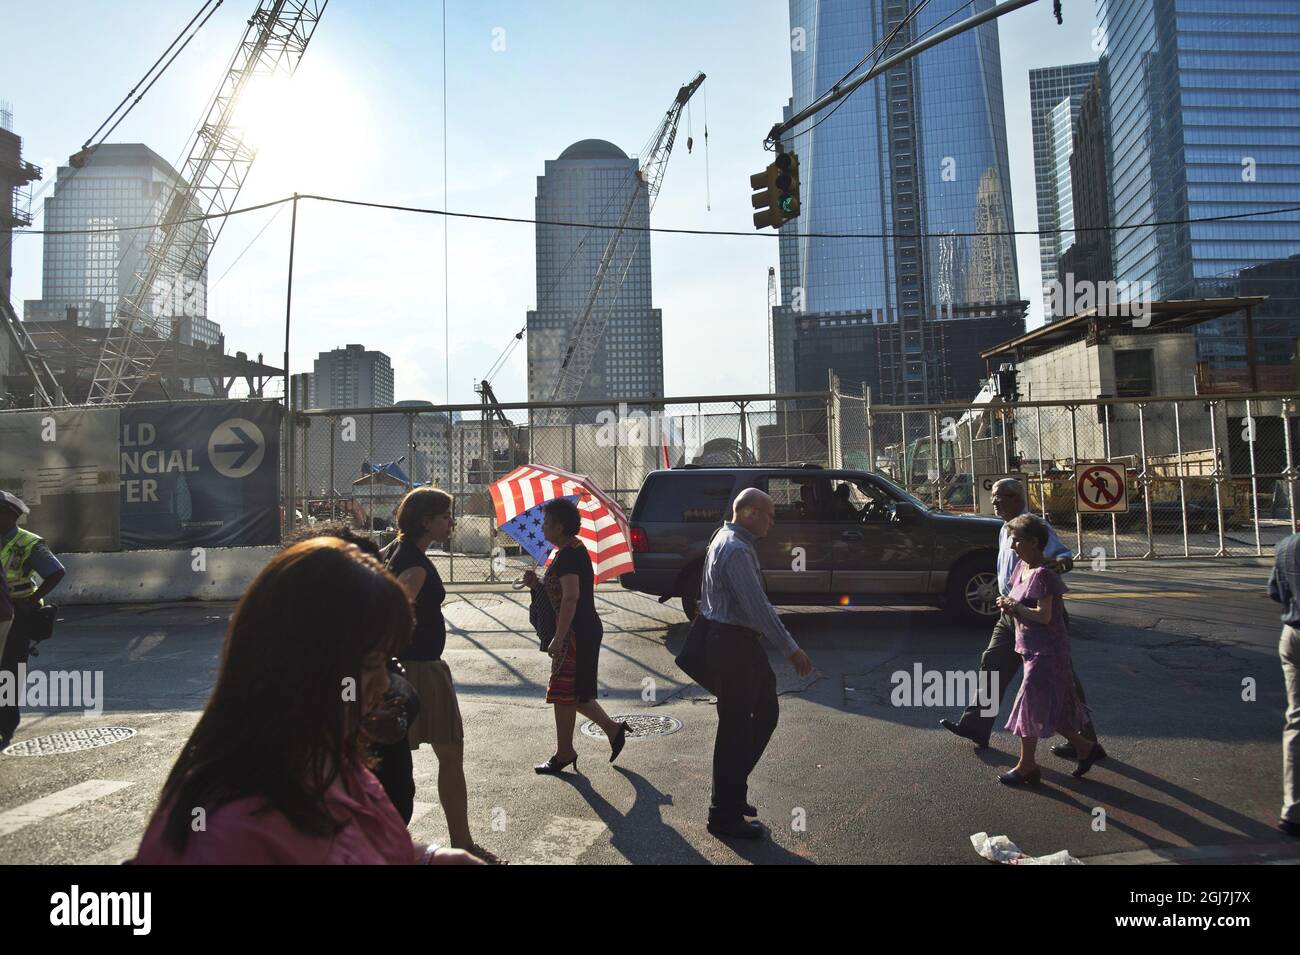 NEW YORK 2012-08-15  * For Your FIles* Ground Zero in New York, USA, August 15, 2012. Foto: Yvonne Asell / SvD / SCANPIX / Kod: 30202 ** OUT SWEDEN OUT ** Stock Photo